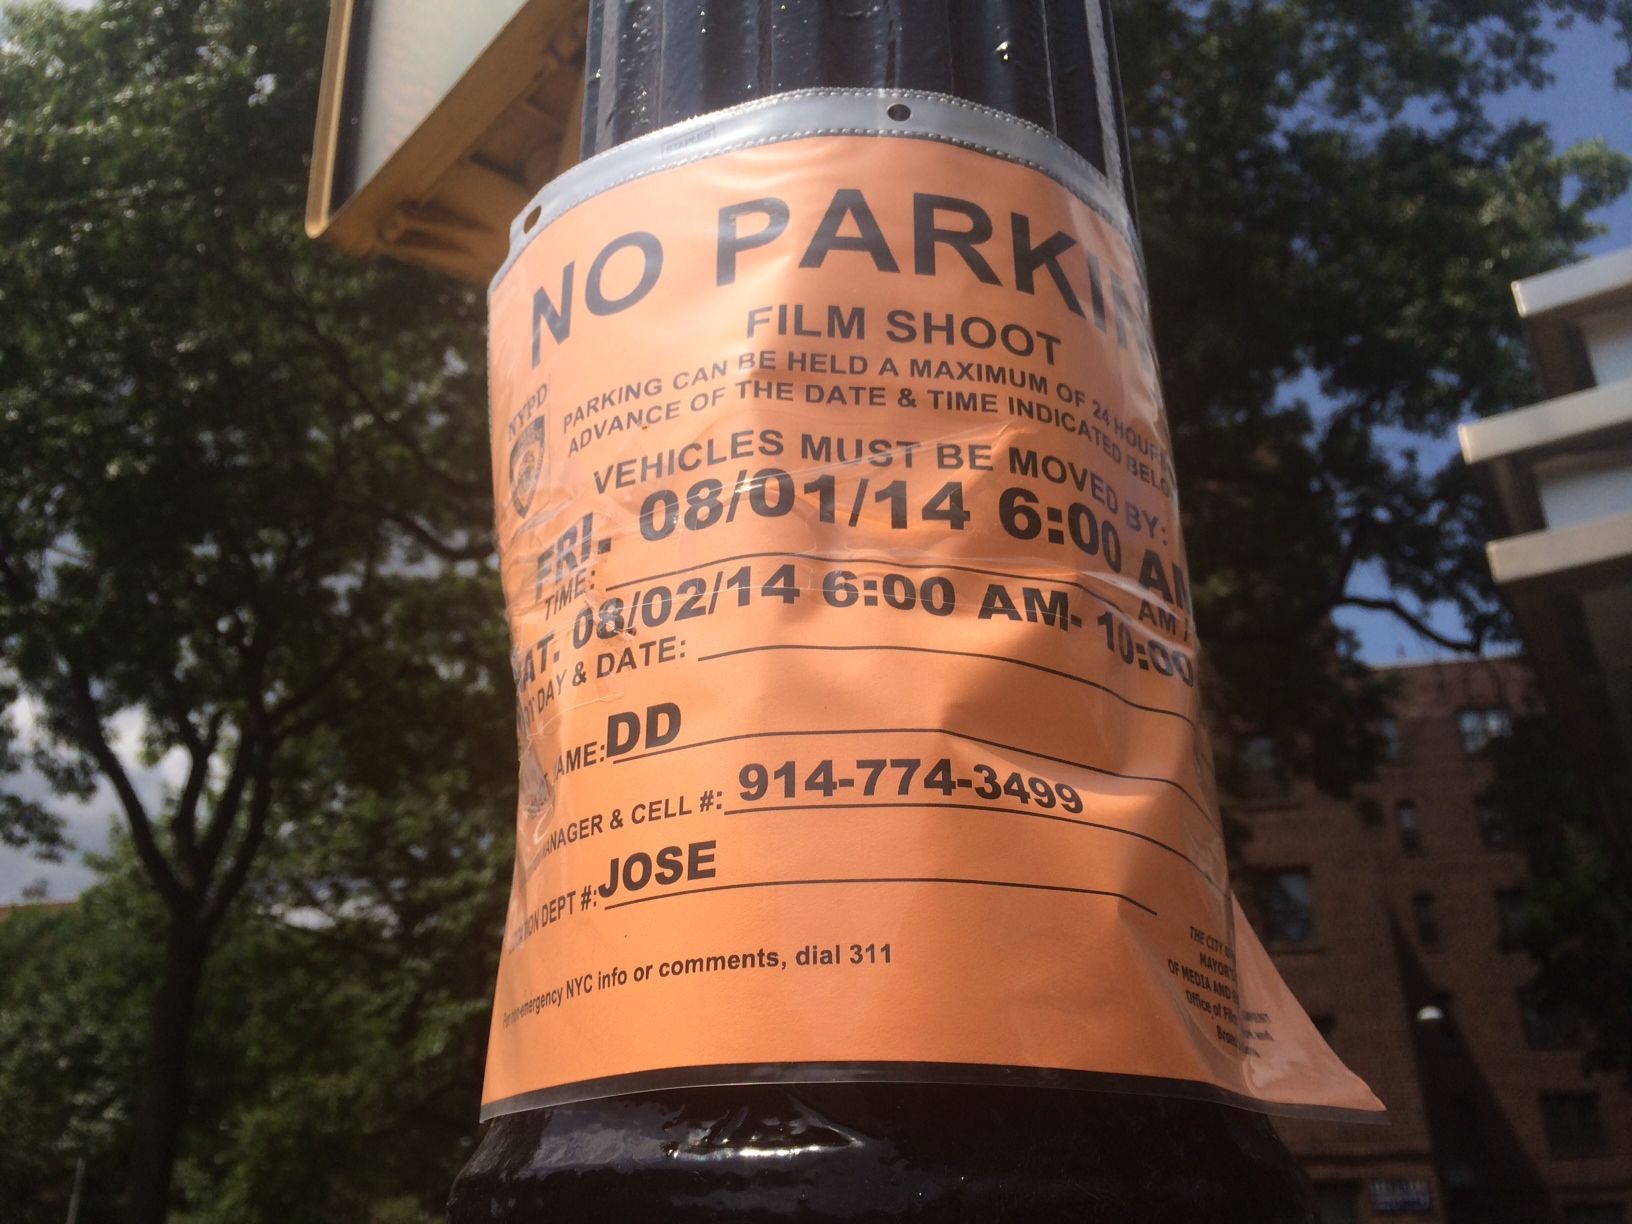 Move Your Car Before 6AM Tomorrow For Filming On Myrtle Avenue